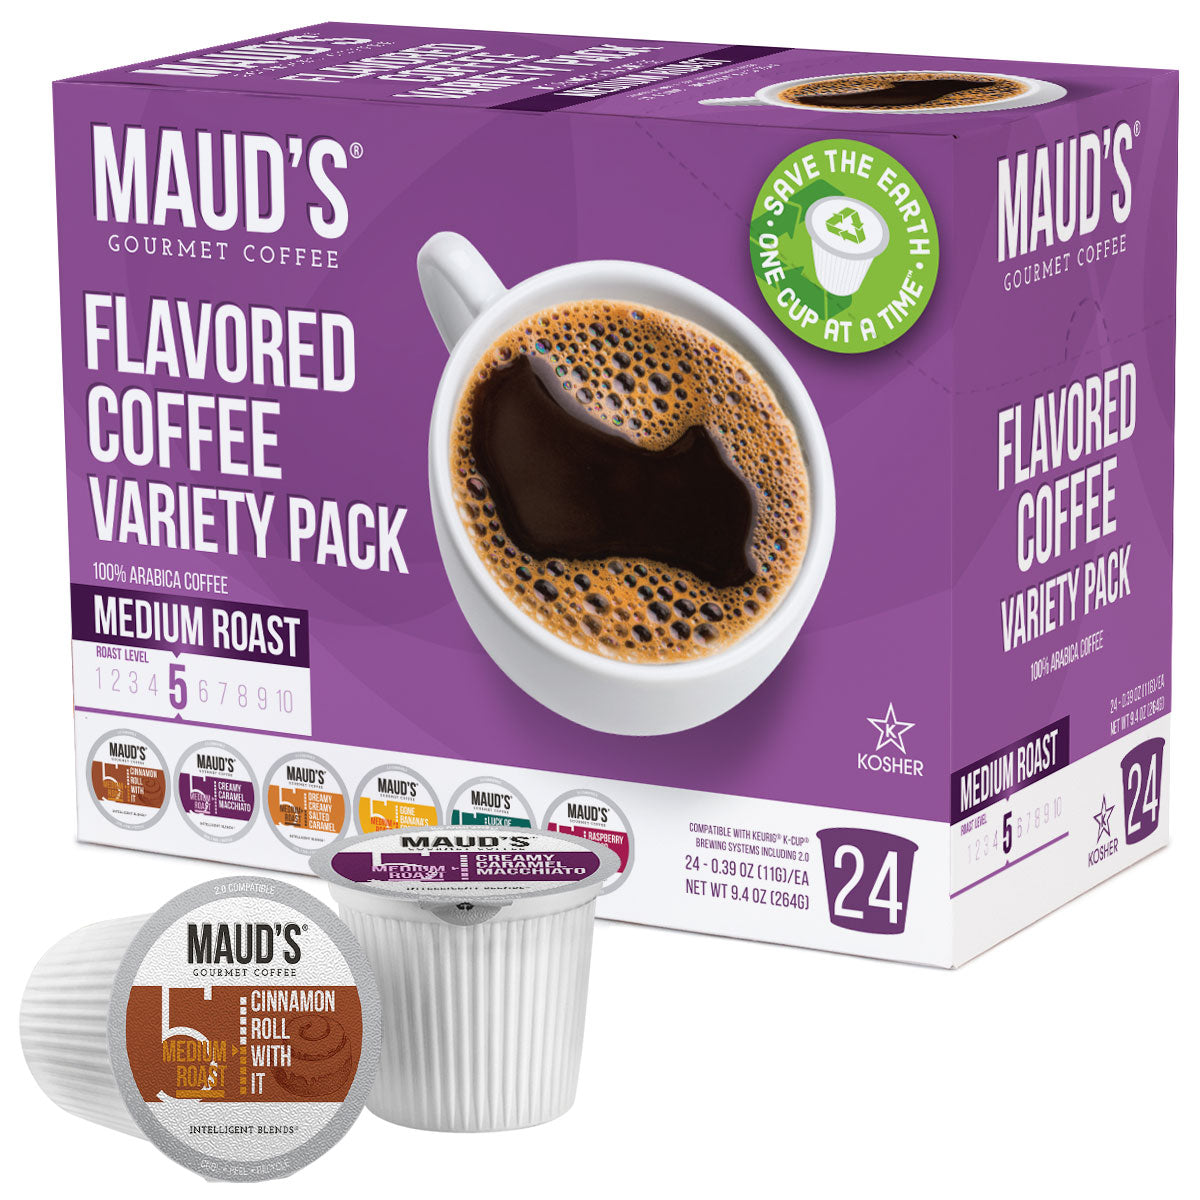 Maud's Flavored Coffee Pods Variety Pack (6 Flavors) - 24 Pods